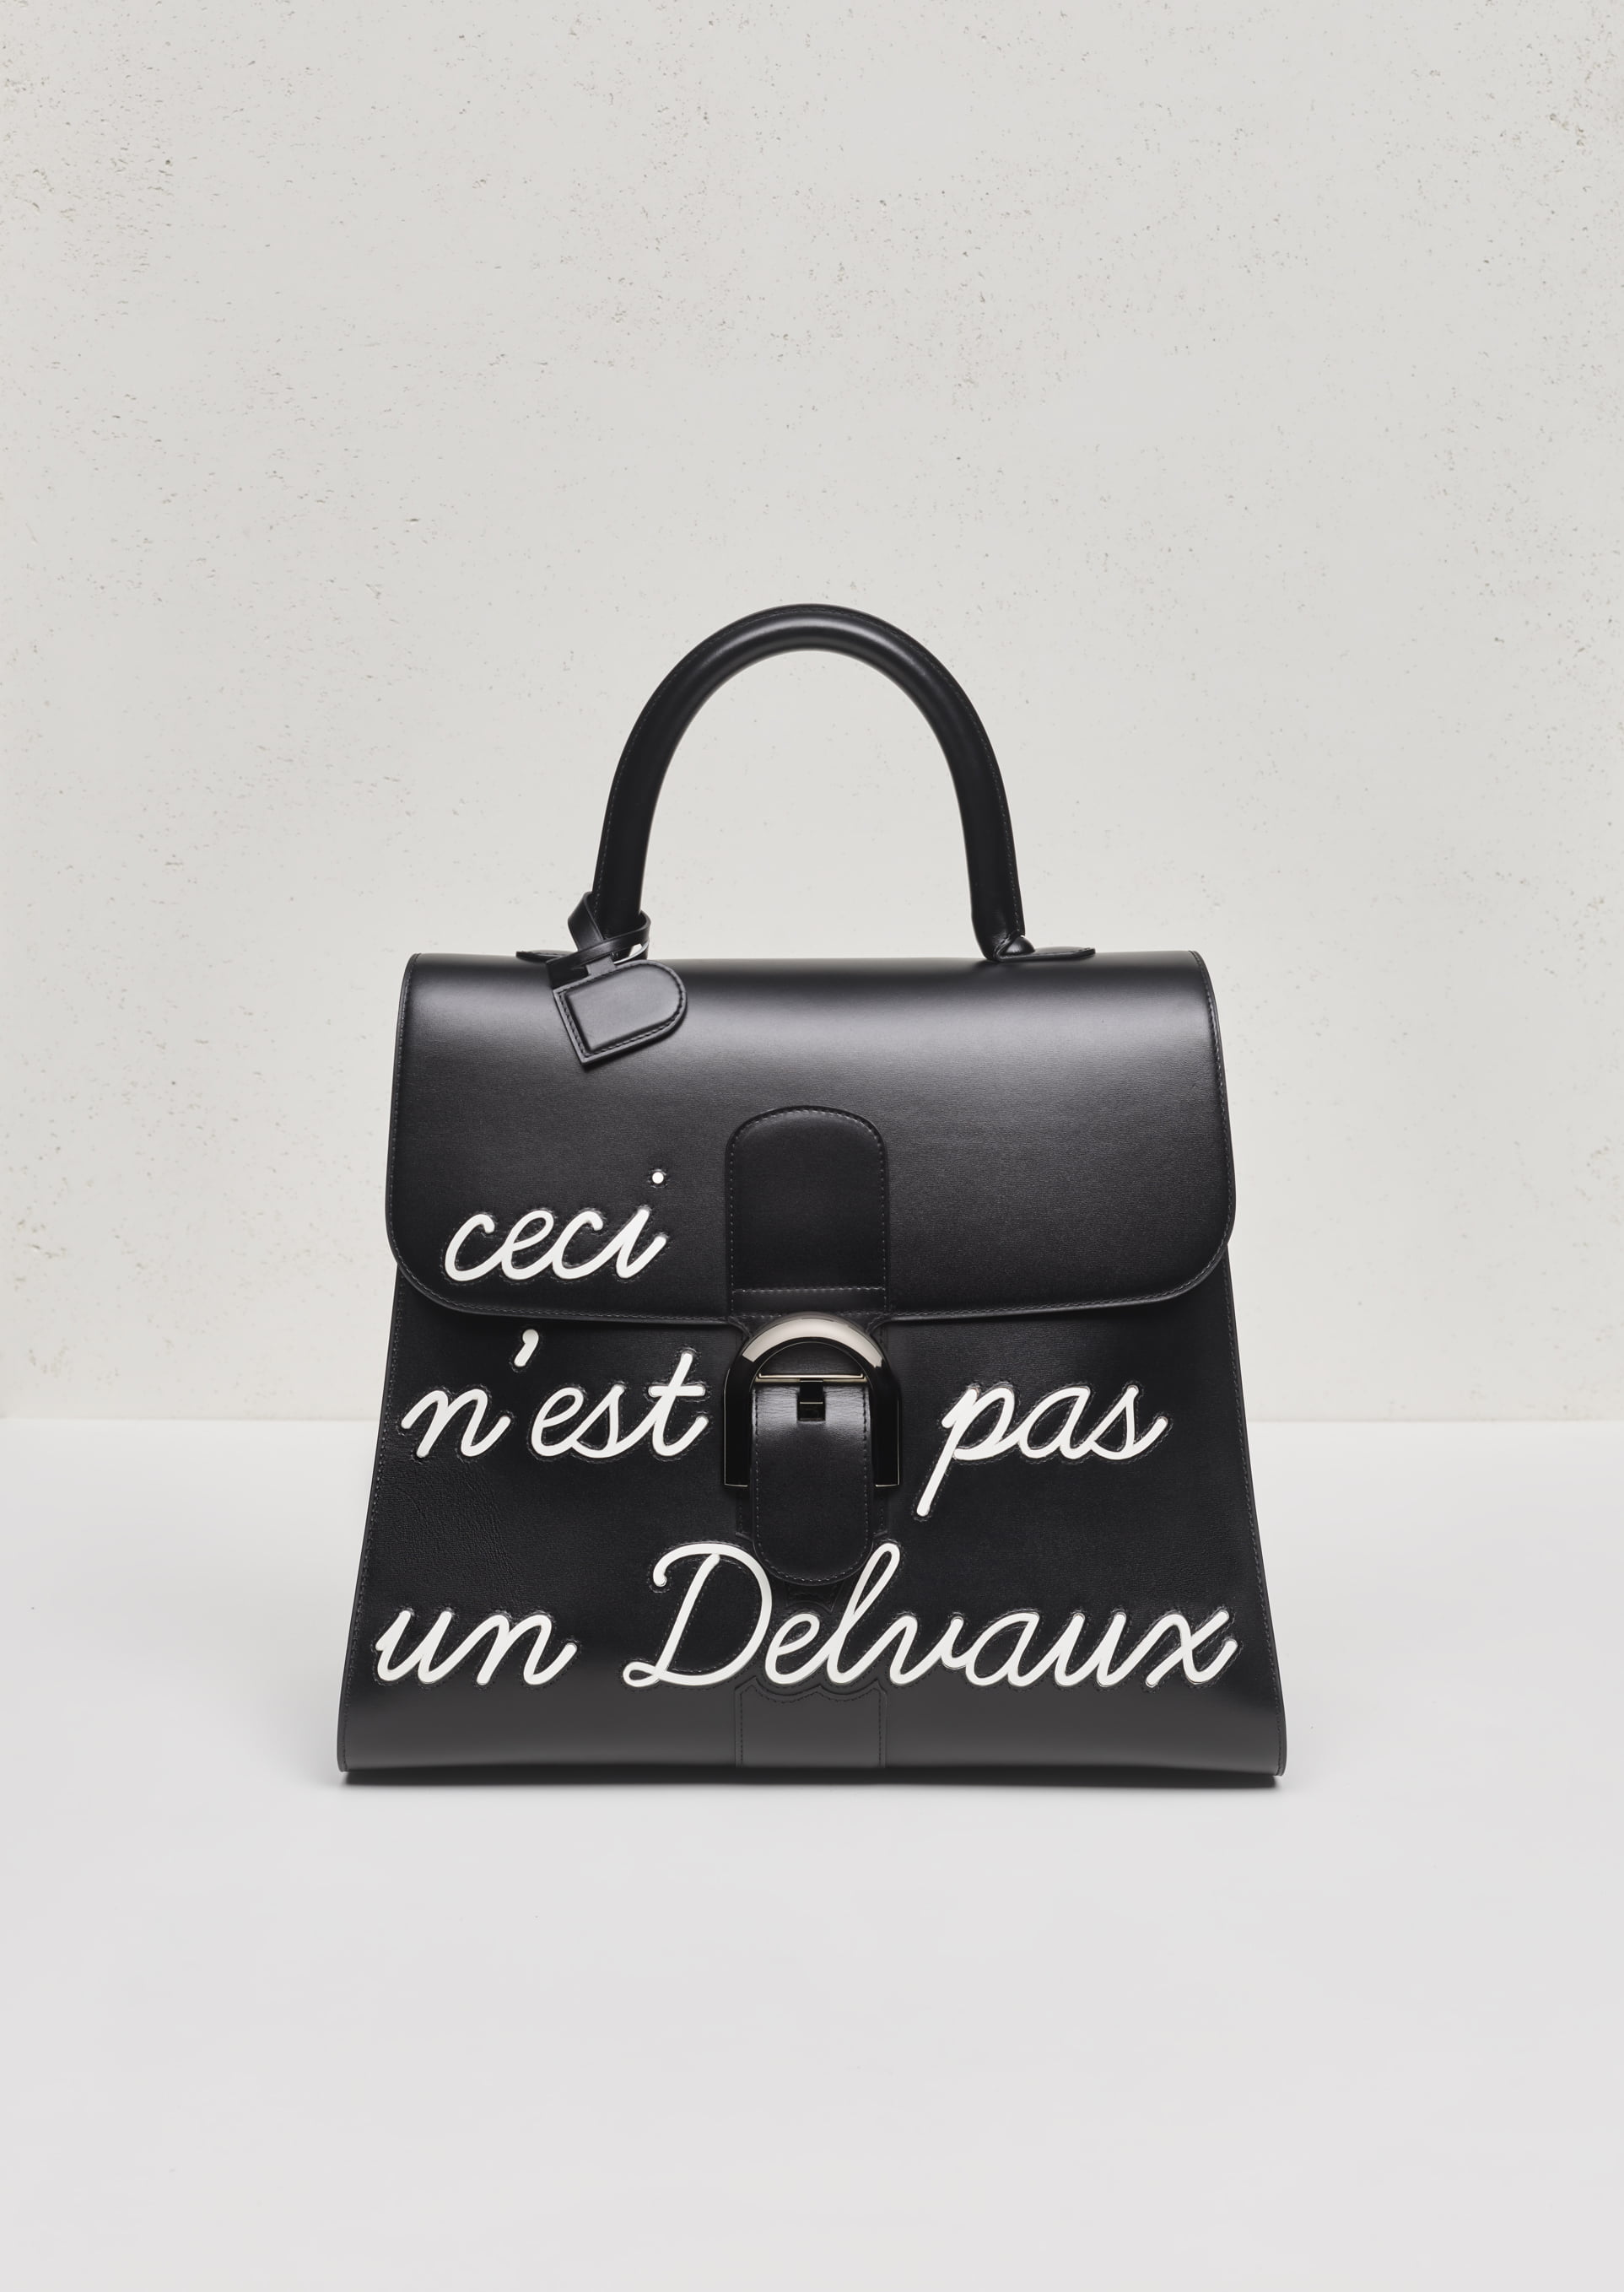 Delvaux - Since 1958, the Brillant has been shining